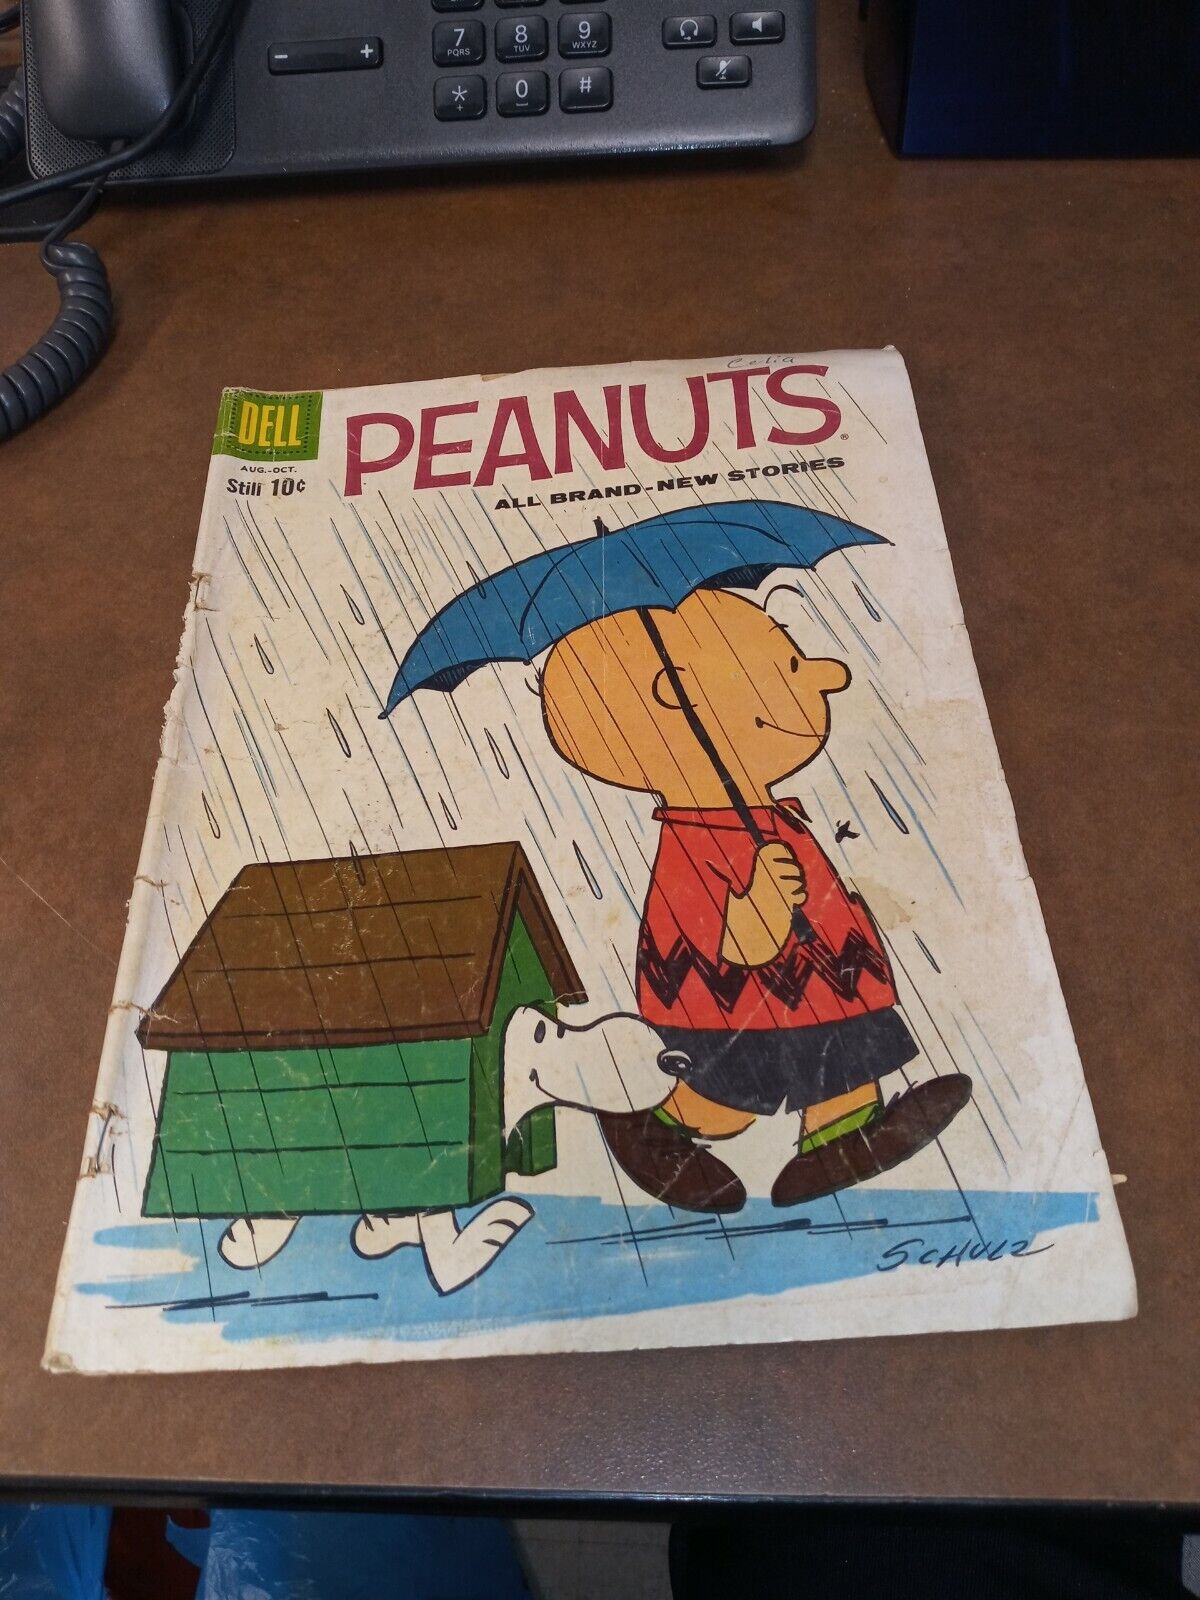 PEANUTS #6 silver age 1960 DELL, SNOOPY, CHARLIE BROWN, CHARLES SCHULZ cover art